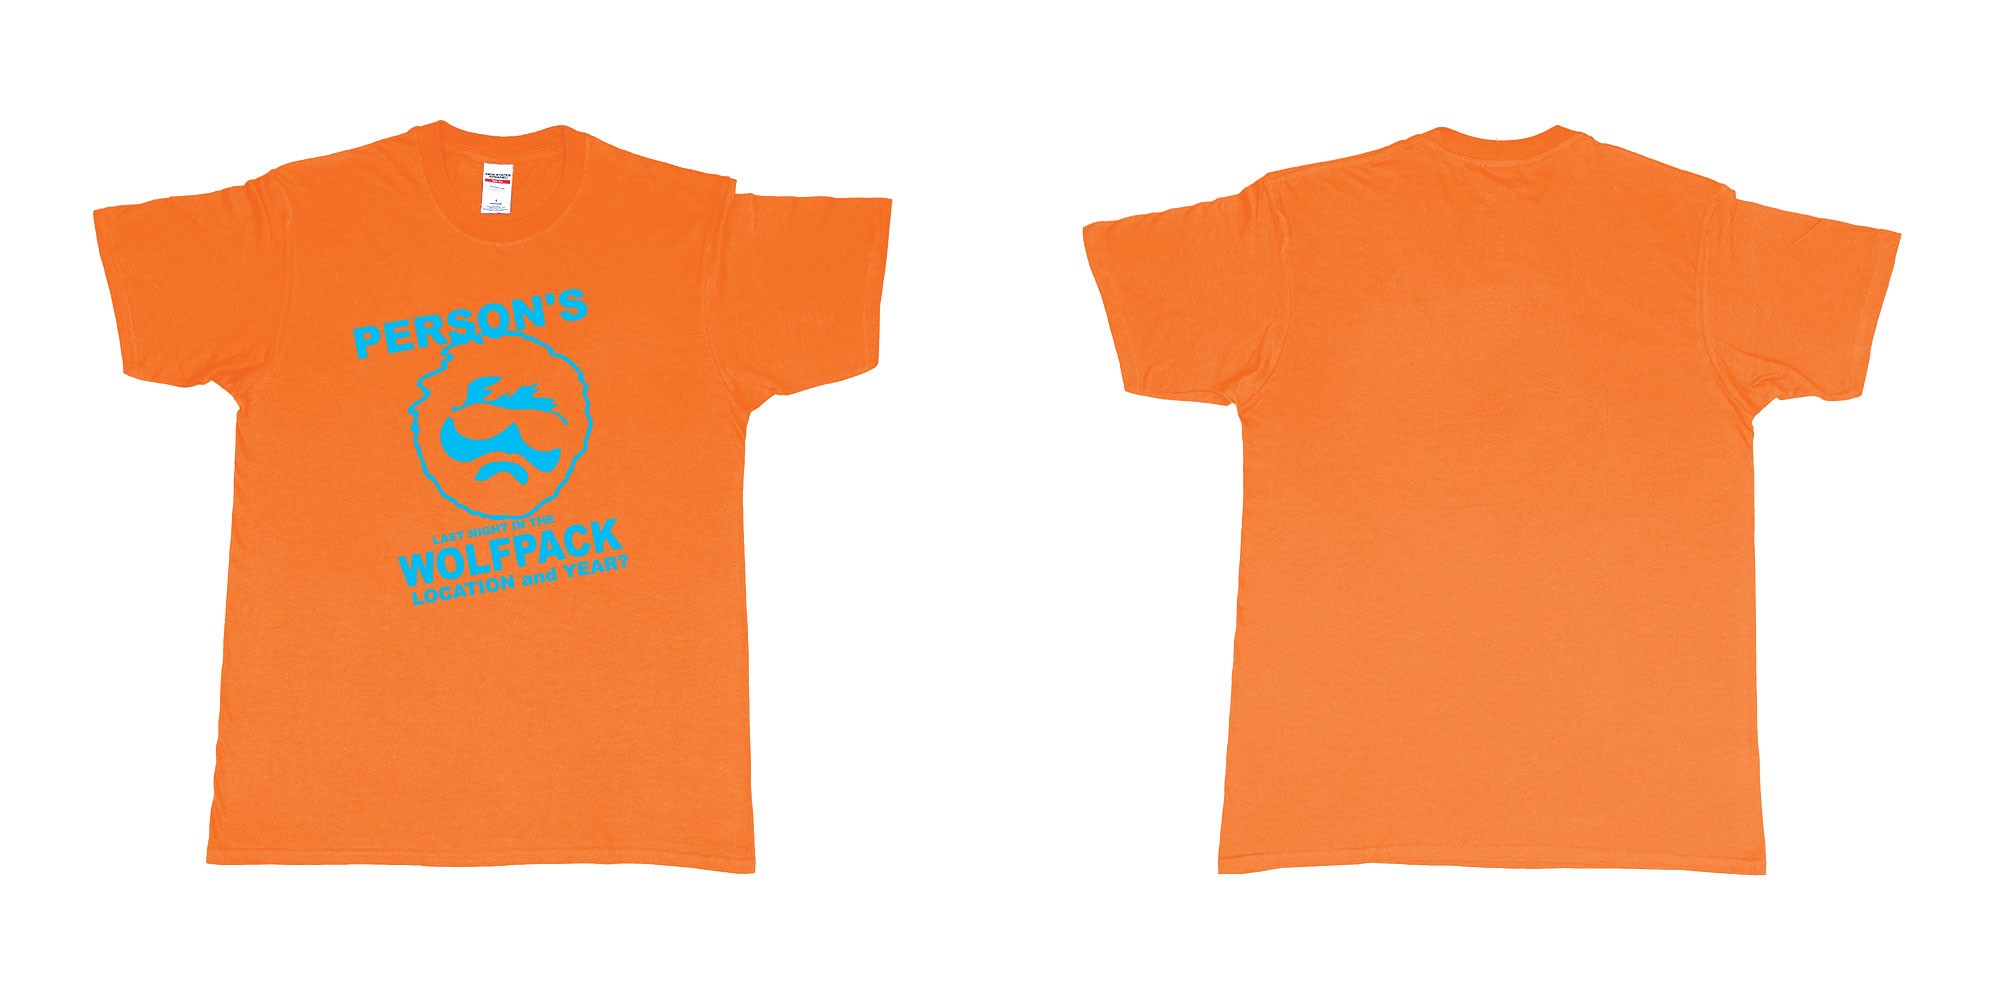 Custom tshirt design wolfpack in fabric color orange choice your own text made in Bali by The Pirate Way